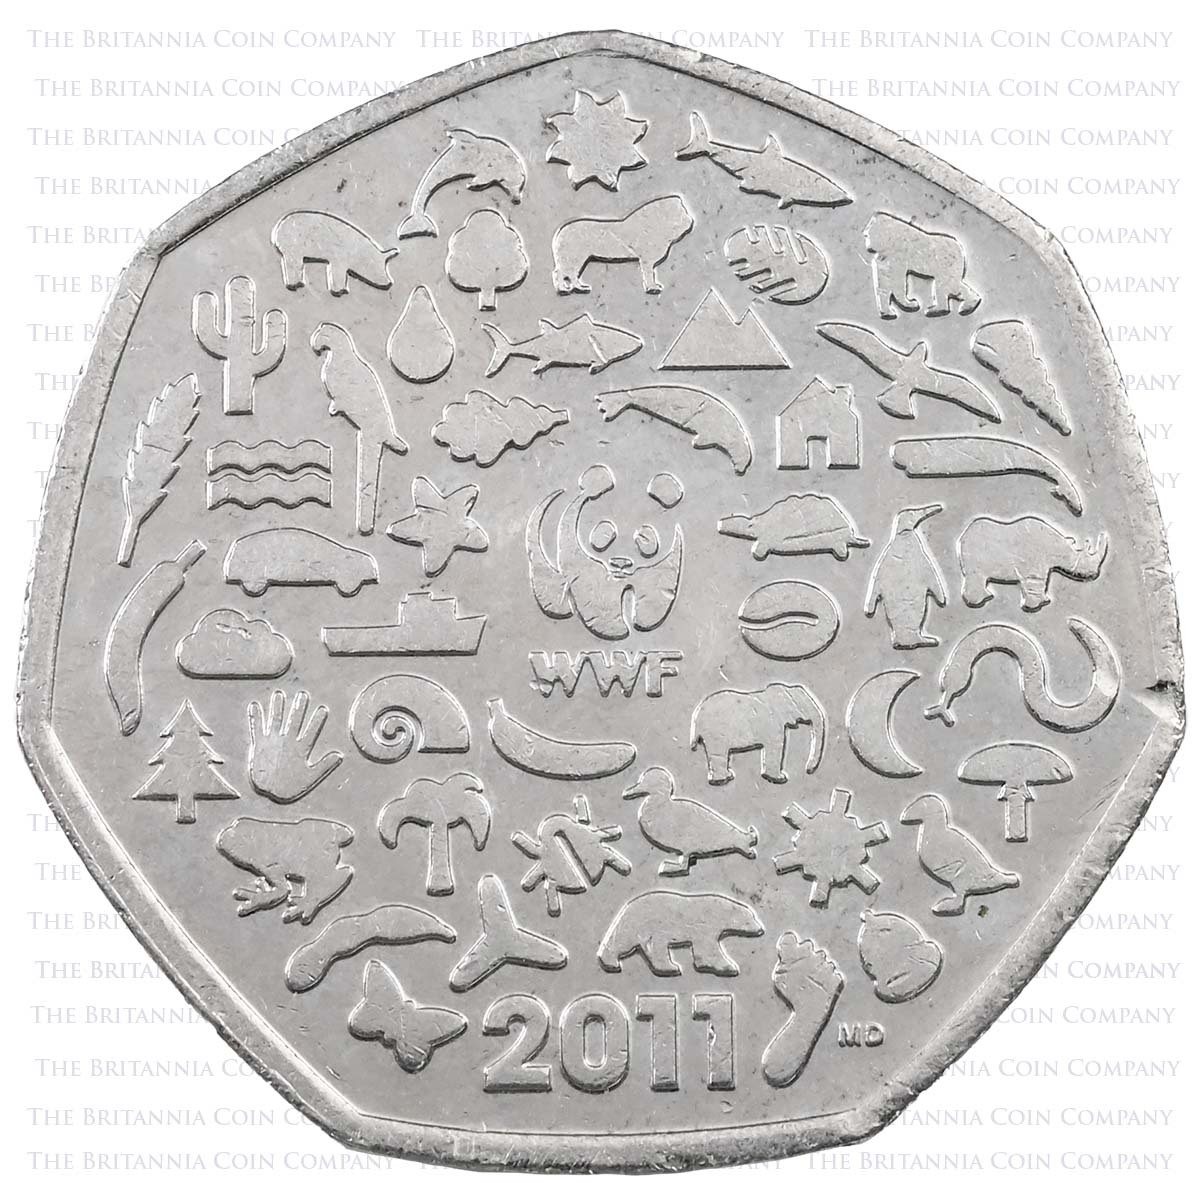 2011 World Wildlife Fund Circulated Fifty Pence Coin Reverse